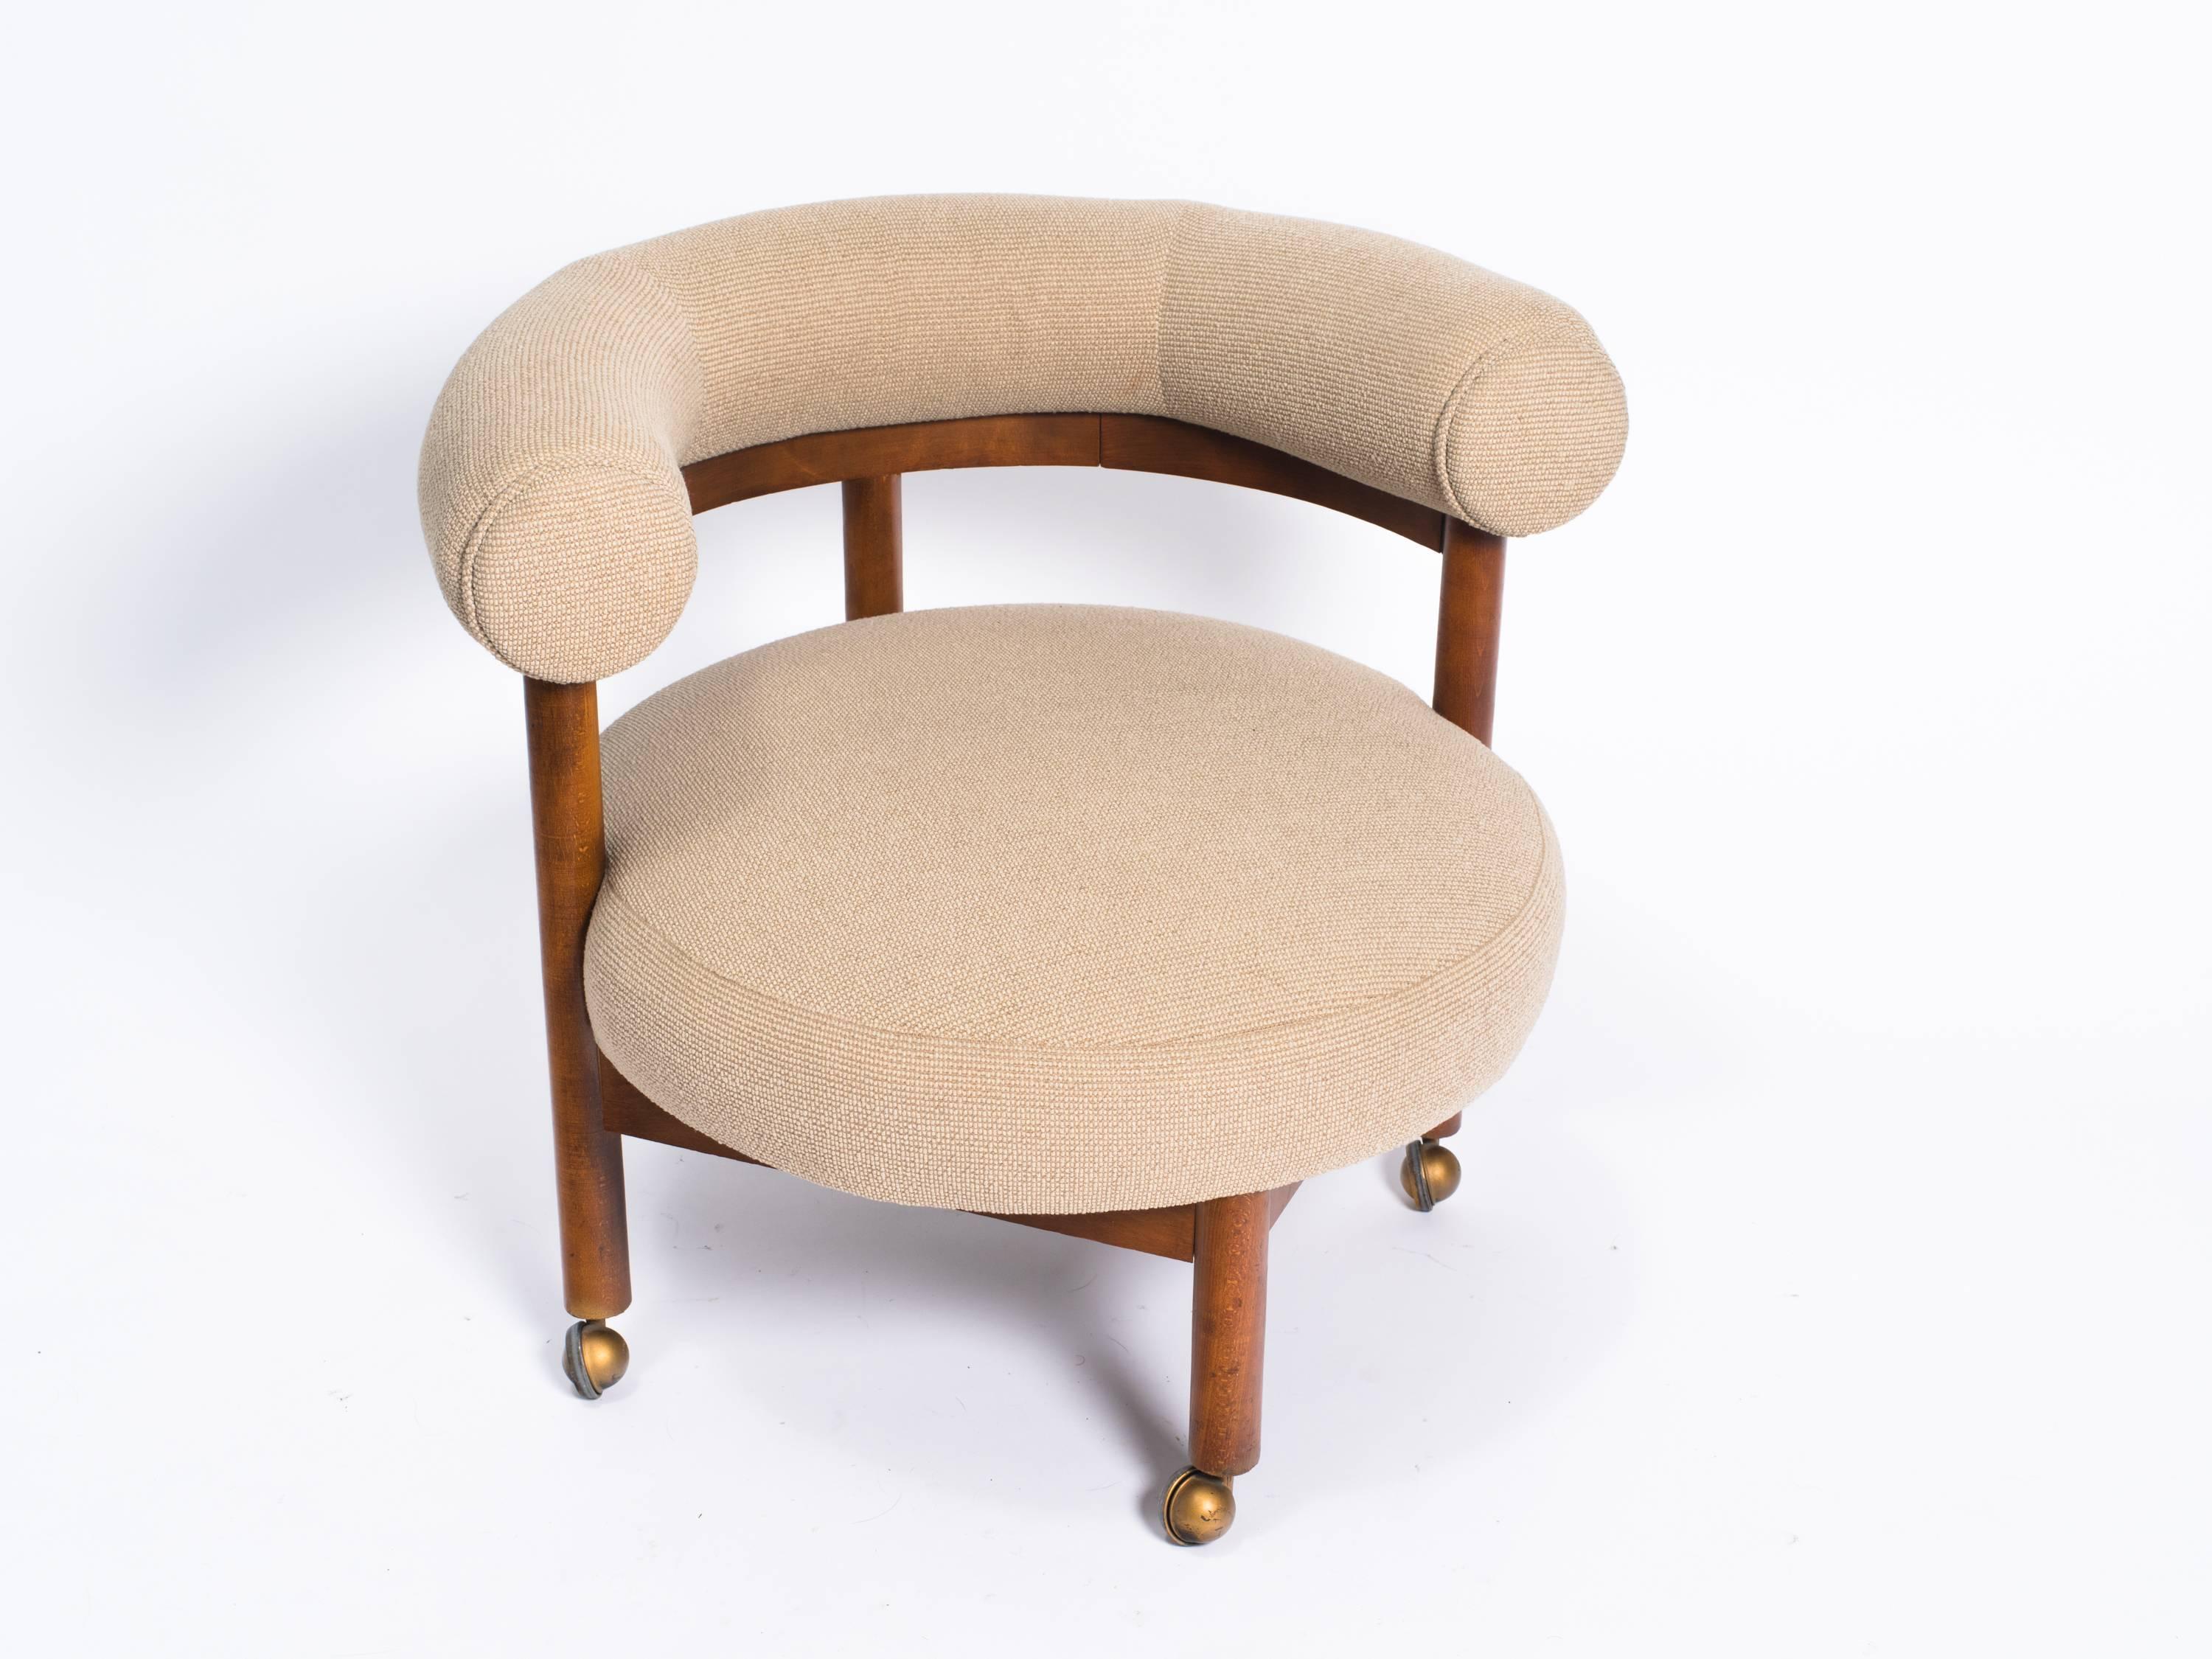 Danish modern occasional chair with casters. Upholstery is good and clean.